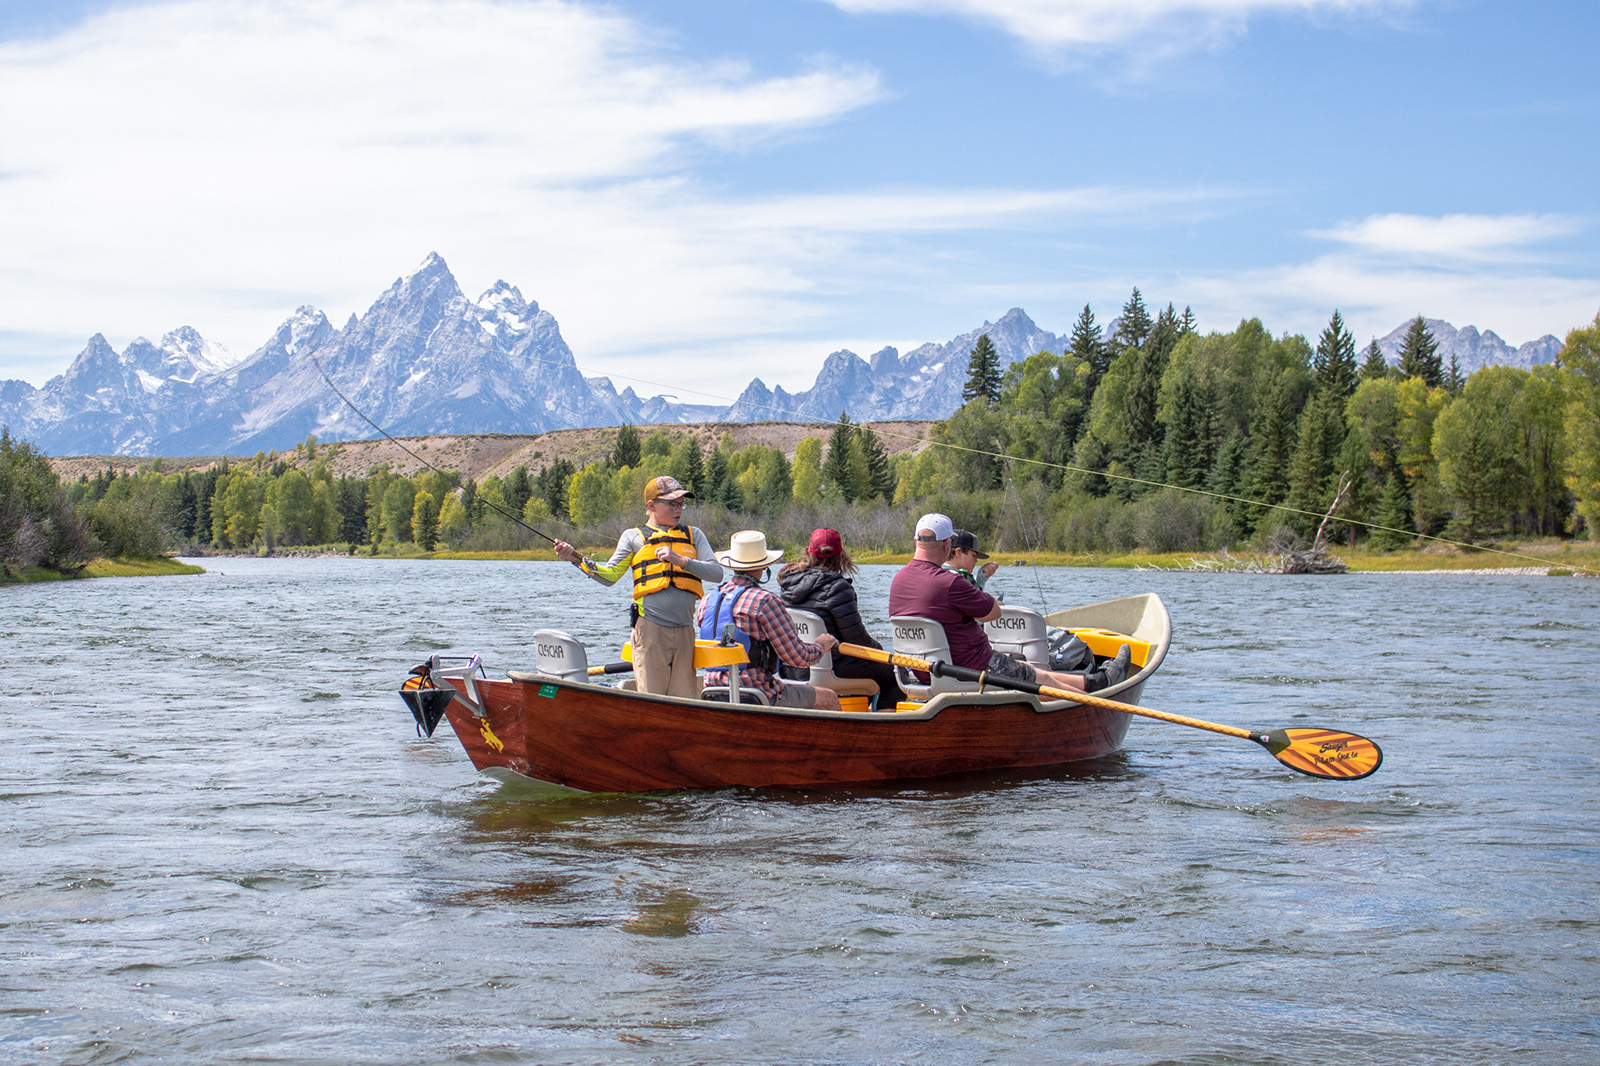 Services - Jackson Hole & Grand Teton Fly Fishing Guided Trips